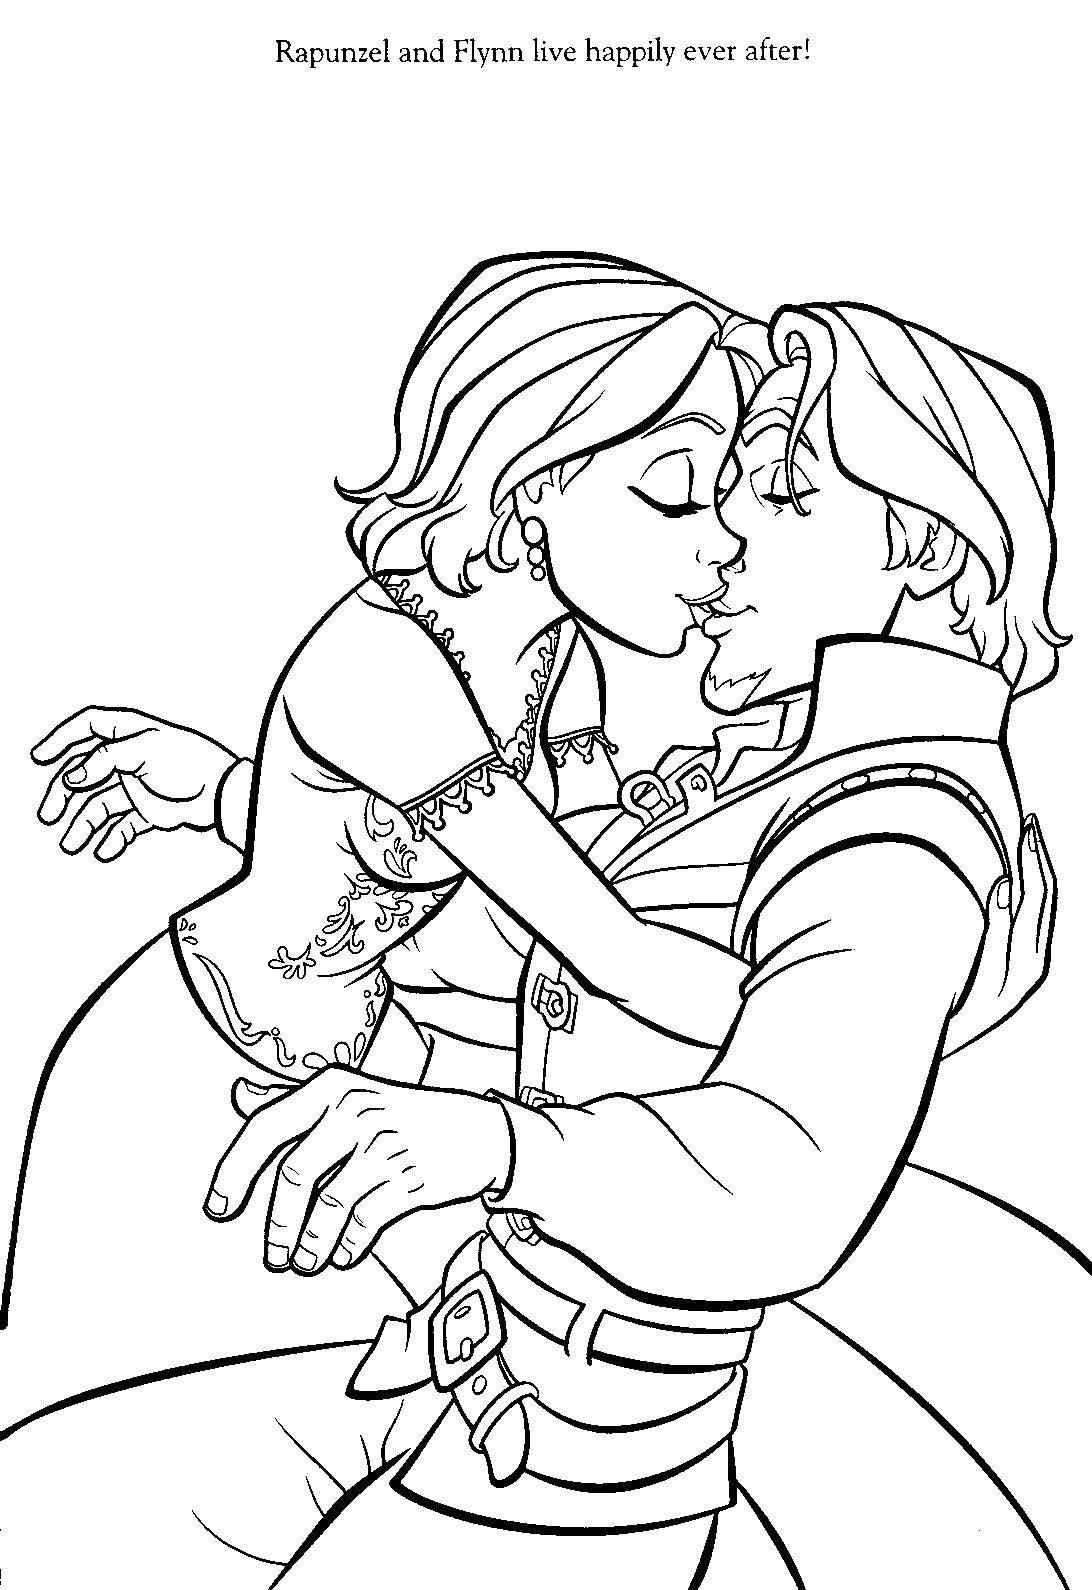 Coloring Rapunzel and Flynn. Category Disney coloring pages. Tags:  Disney, Rapunzel.